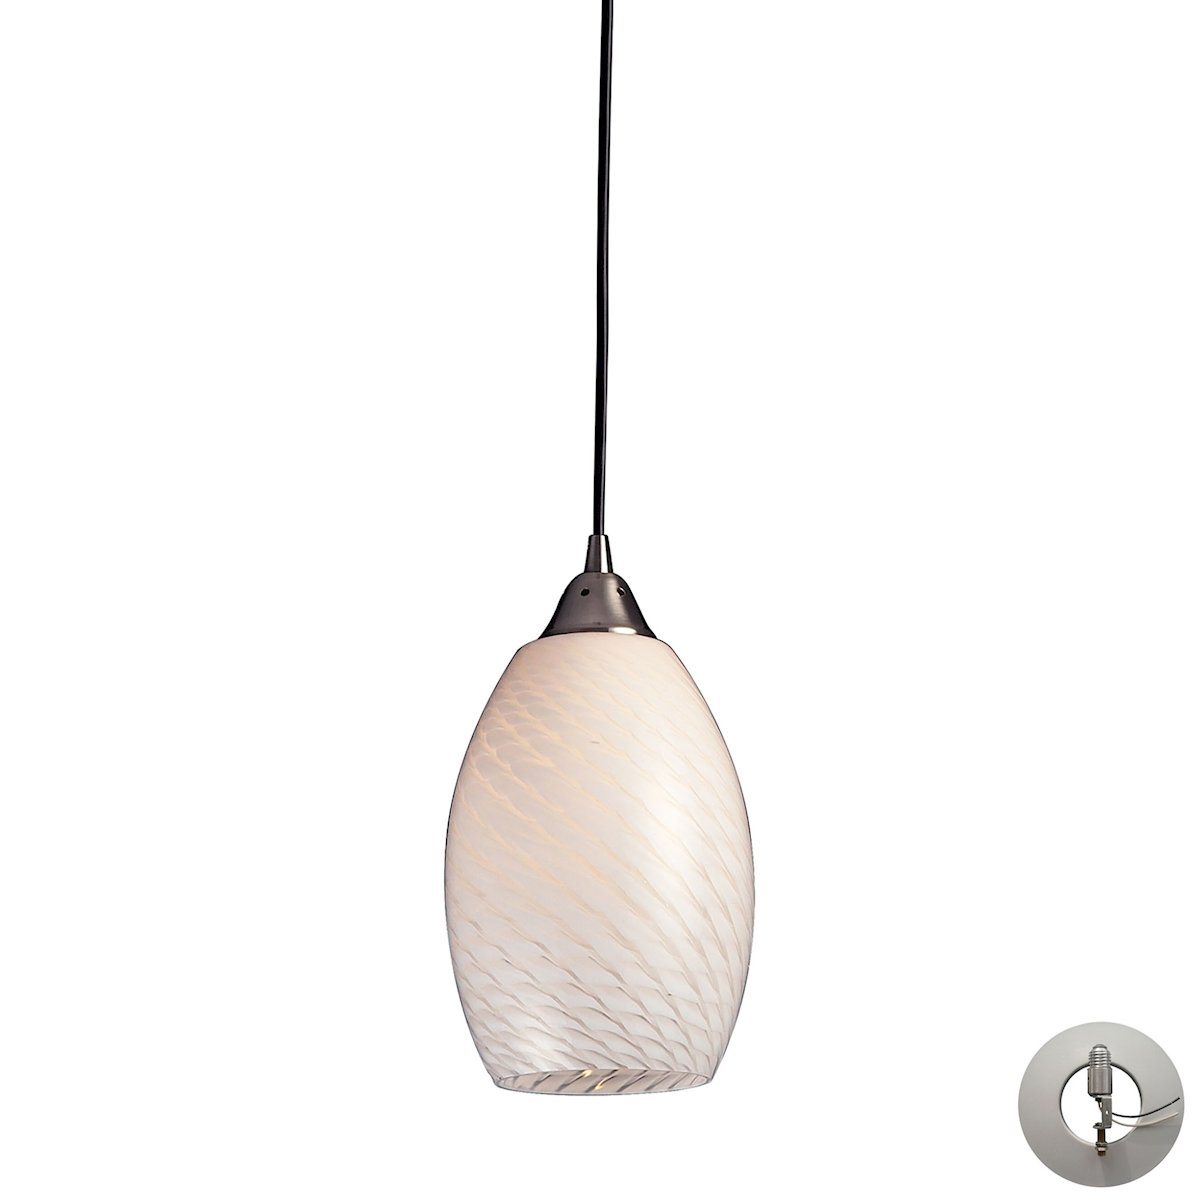 Mulinello Pendant In Satin Nickel And White Swirl Glass - Includes Recessed Lighting Kit Ceiling Elk Lighting 